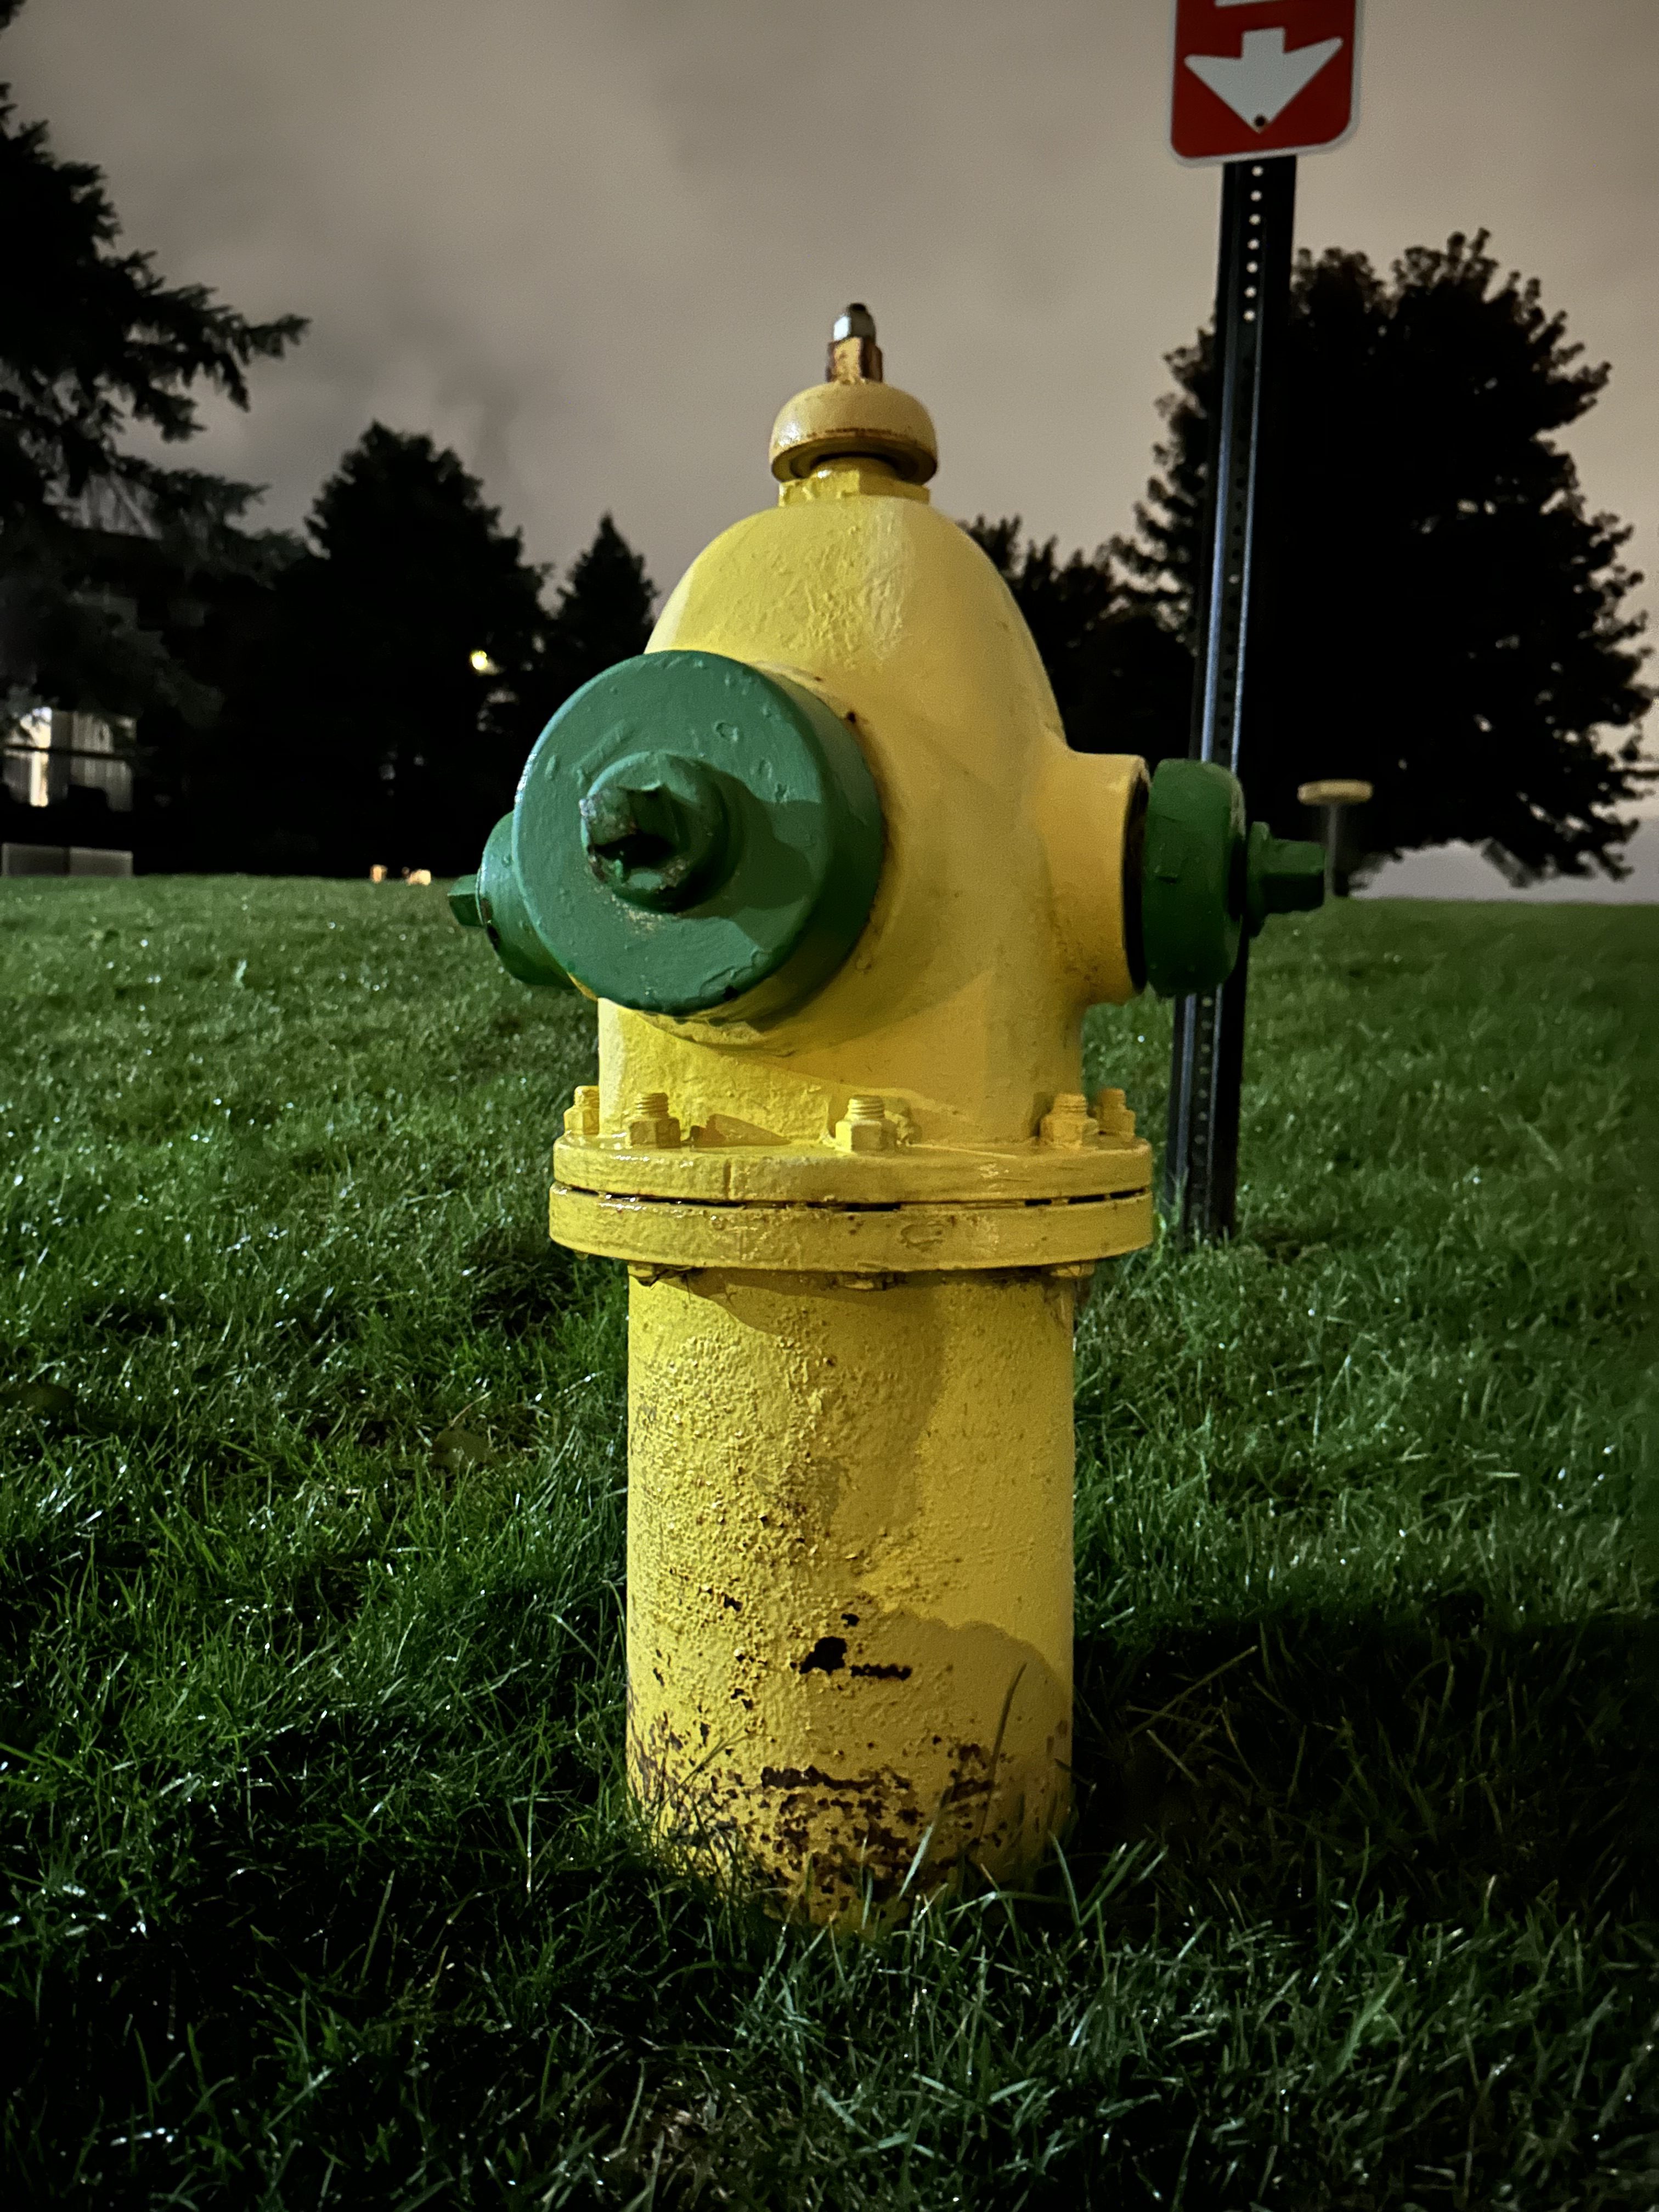 Photo of a yellow fire hydrant at night, taken with the iPhone 14 Pro Max.